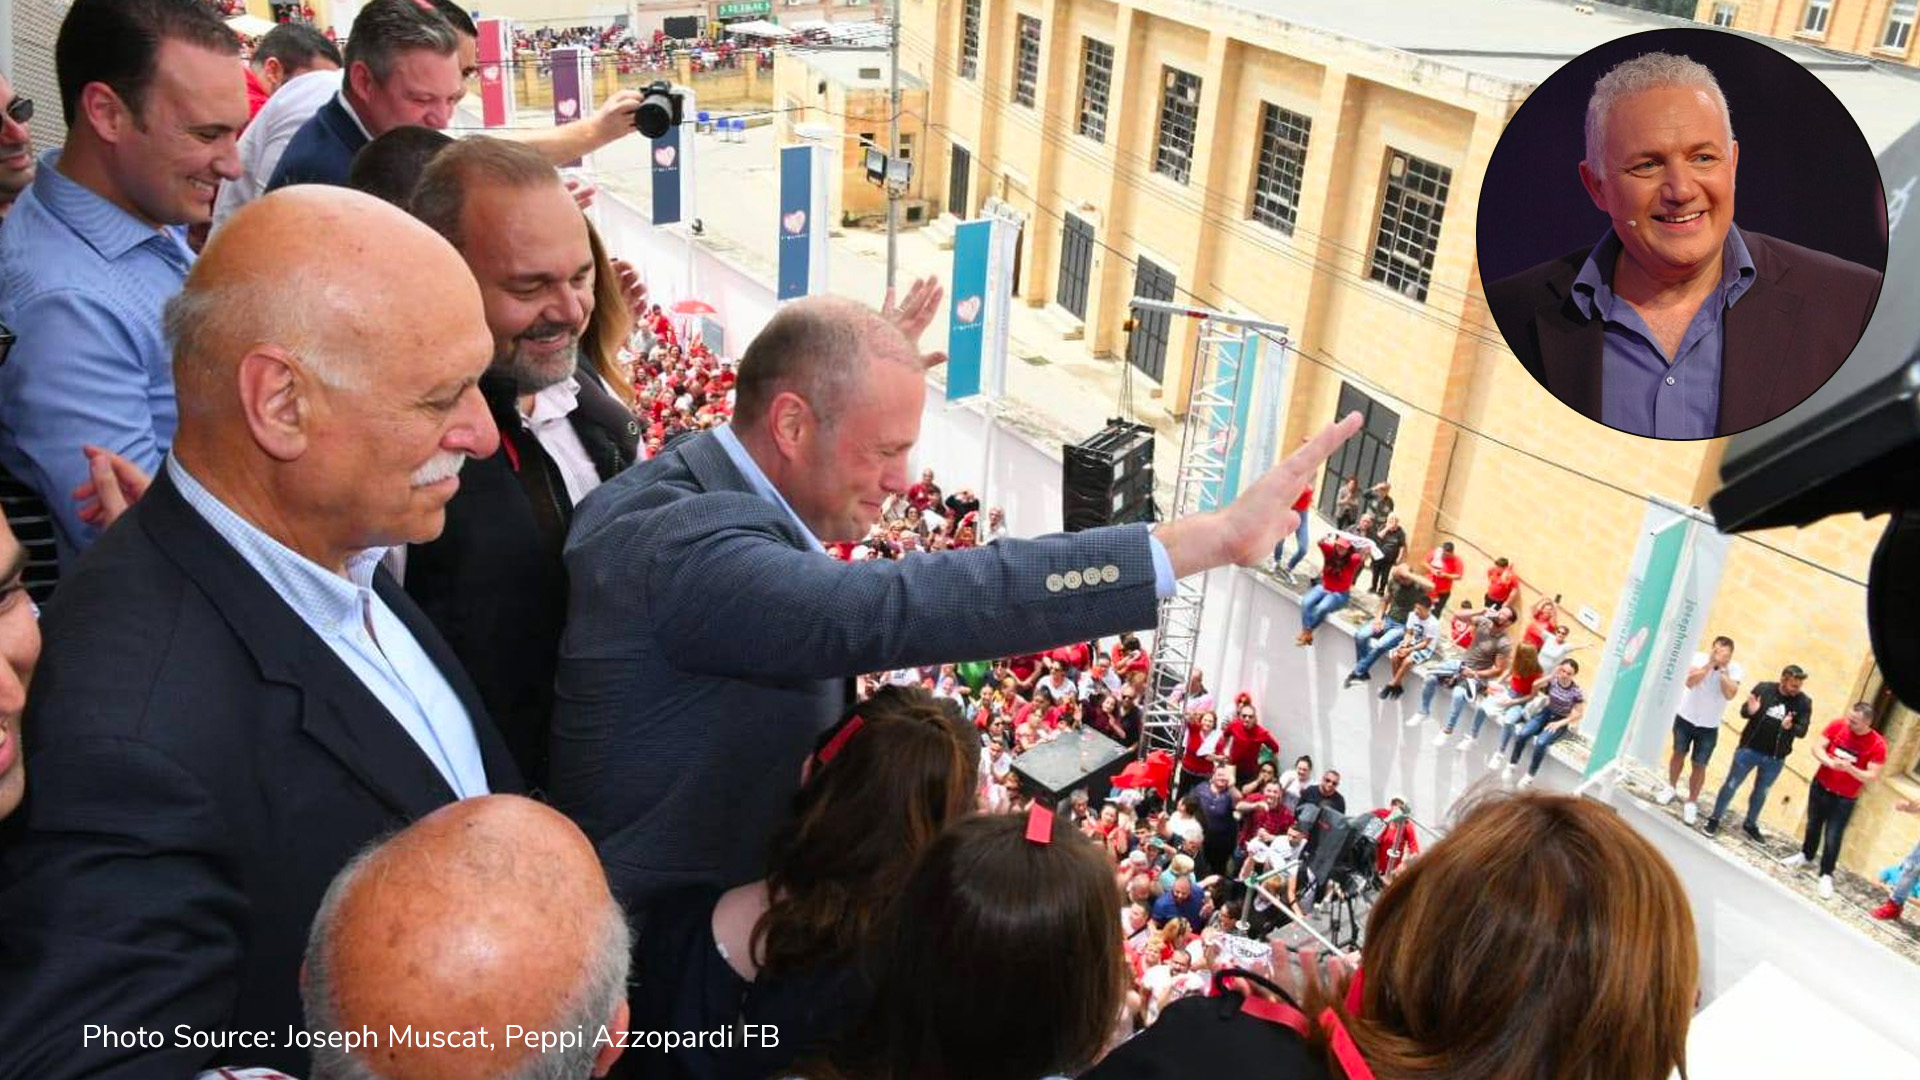 Writing on a blog on Illum, Xarbank host Peppi Azzopardi explains why, had he not resigned, Joseph Muscat would have been re-elected along with Labour